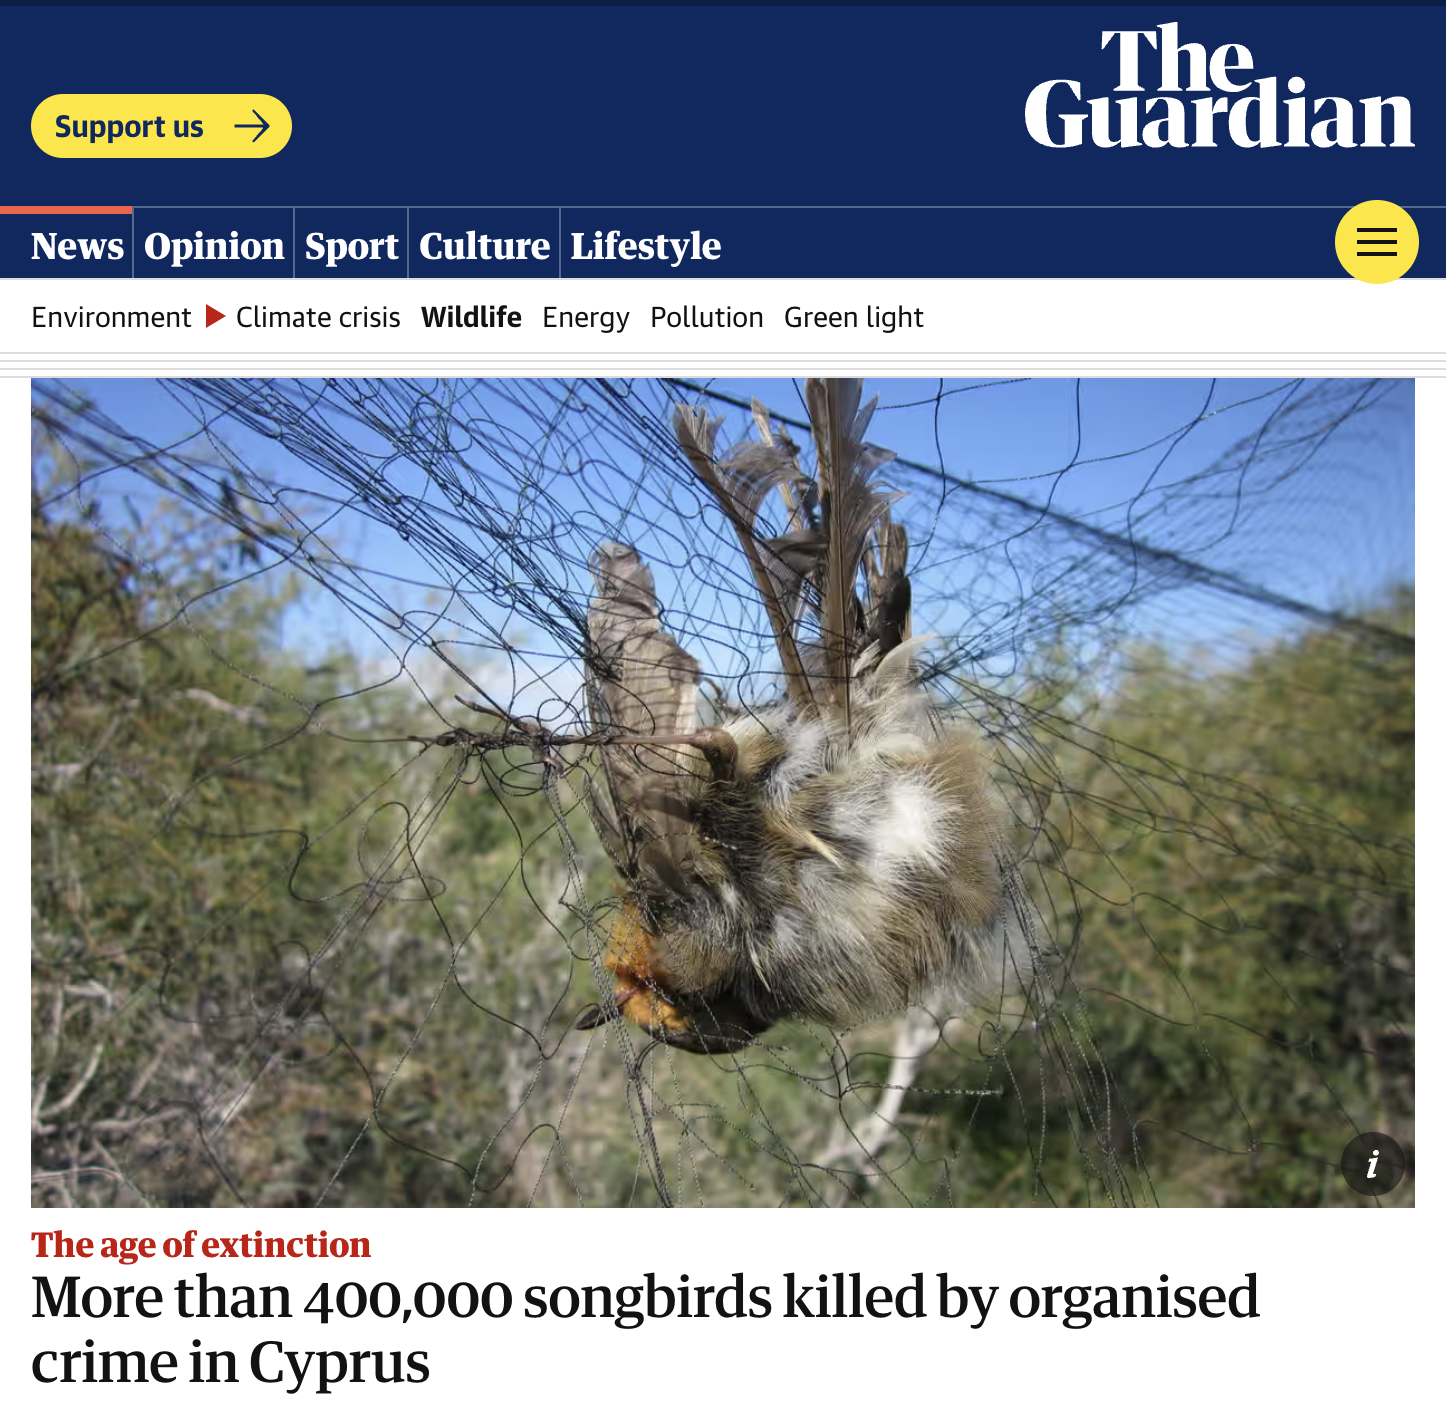 birds cyprus nets - Support us News Opinion Sport Culture Lifestyle Environment Climate crisis Wildlife Energy Pollution Green light The Guardian The age of extinction More than 400,000 songbirds killed by organised crime in Cyprus